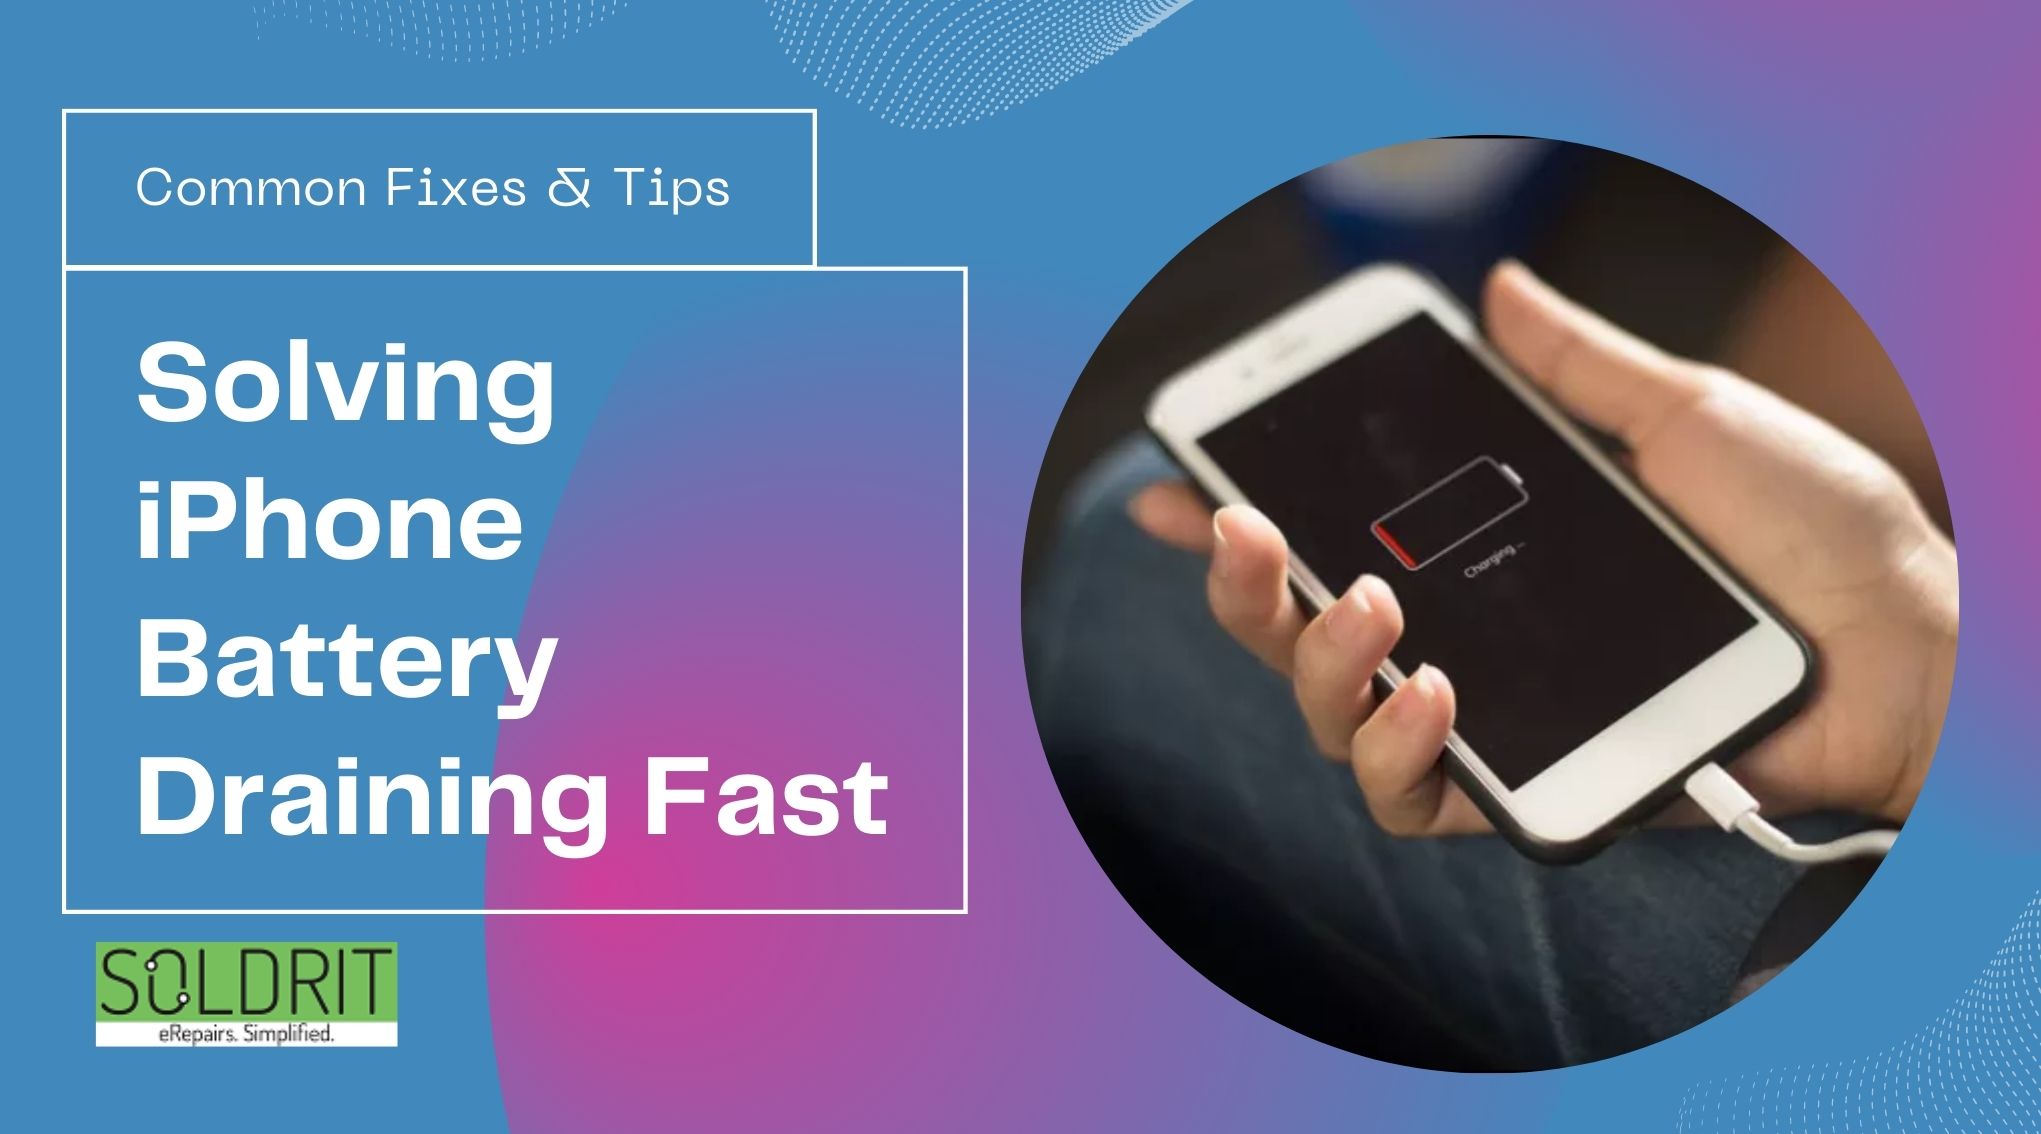 Solving iPhone Battery Draining Fast: Common Fixes & Tips